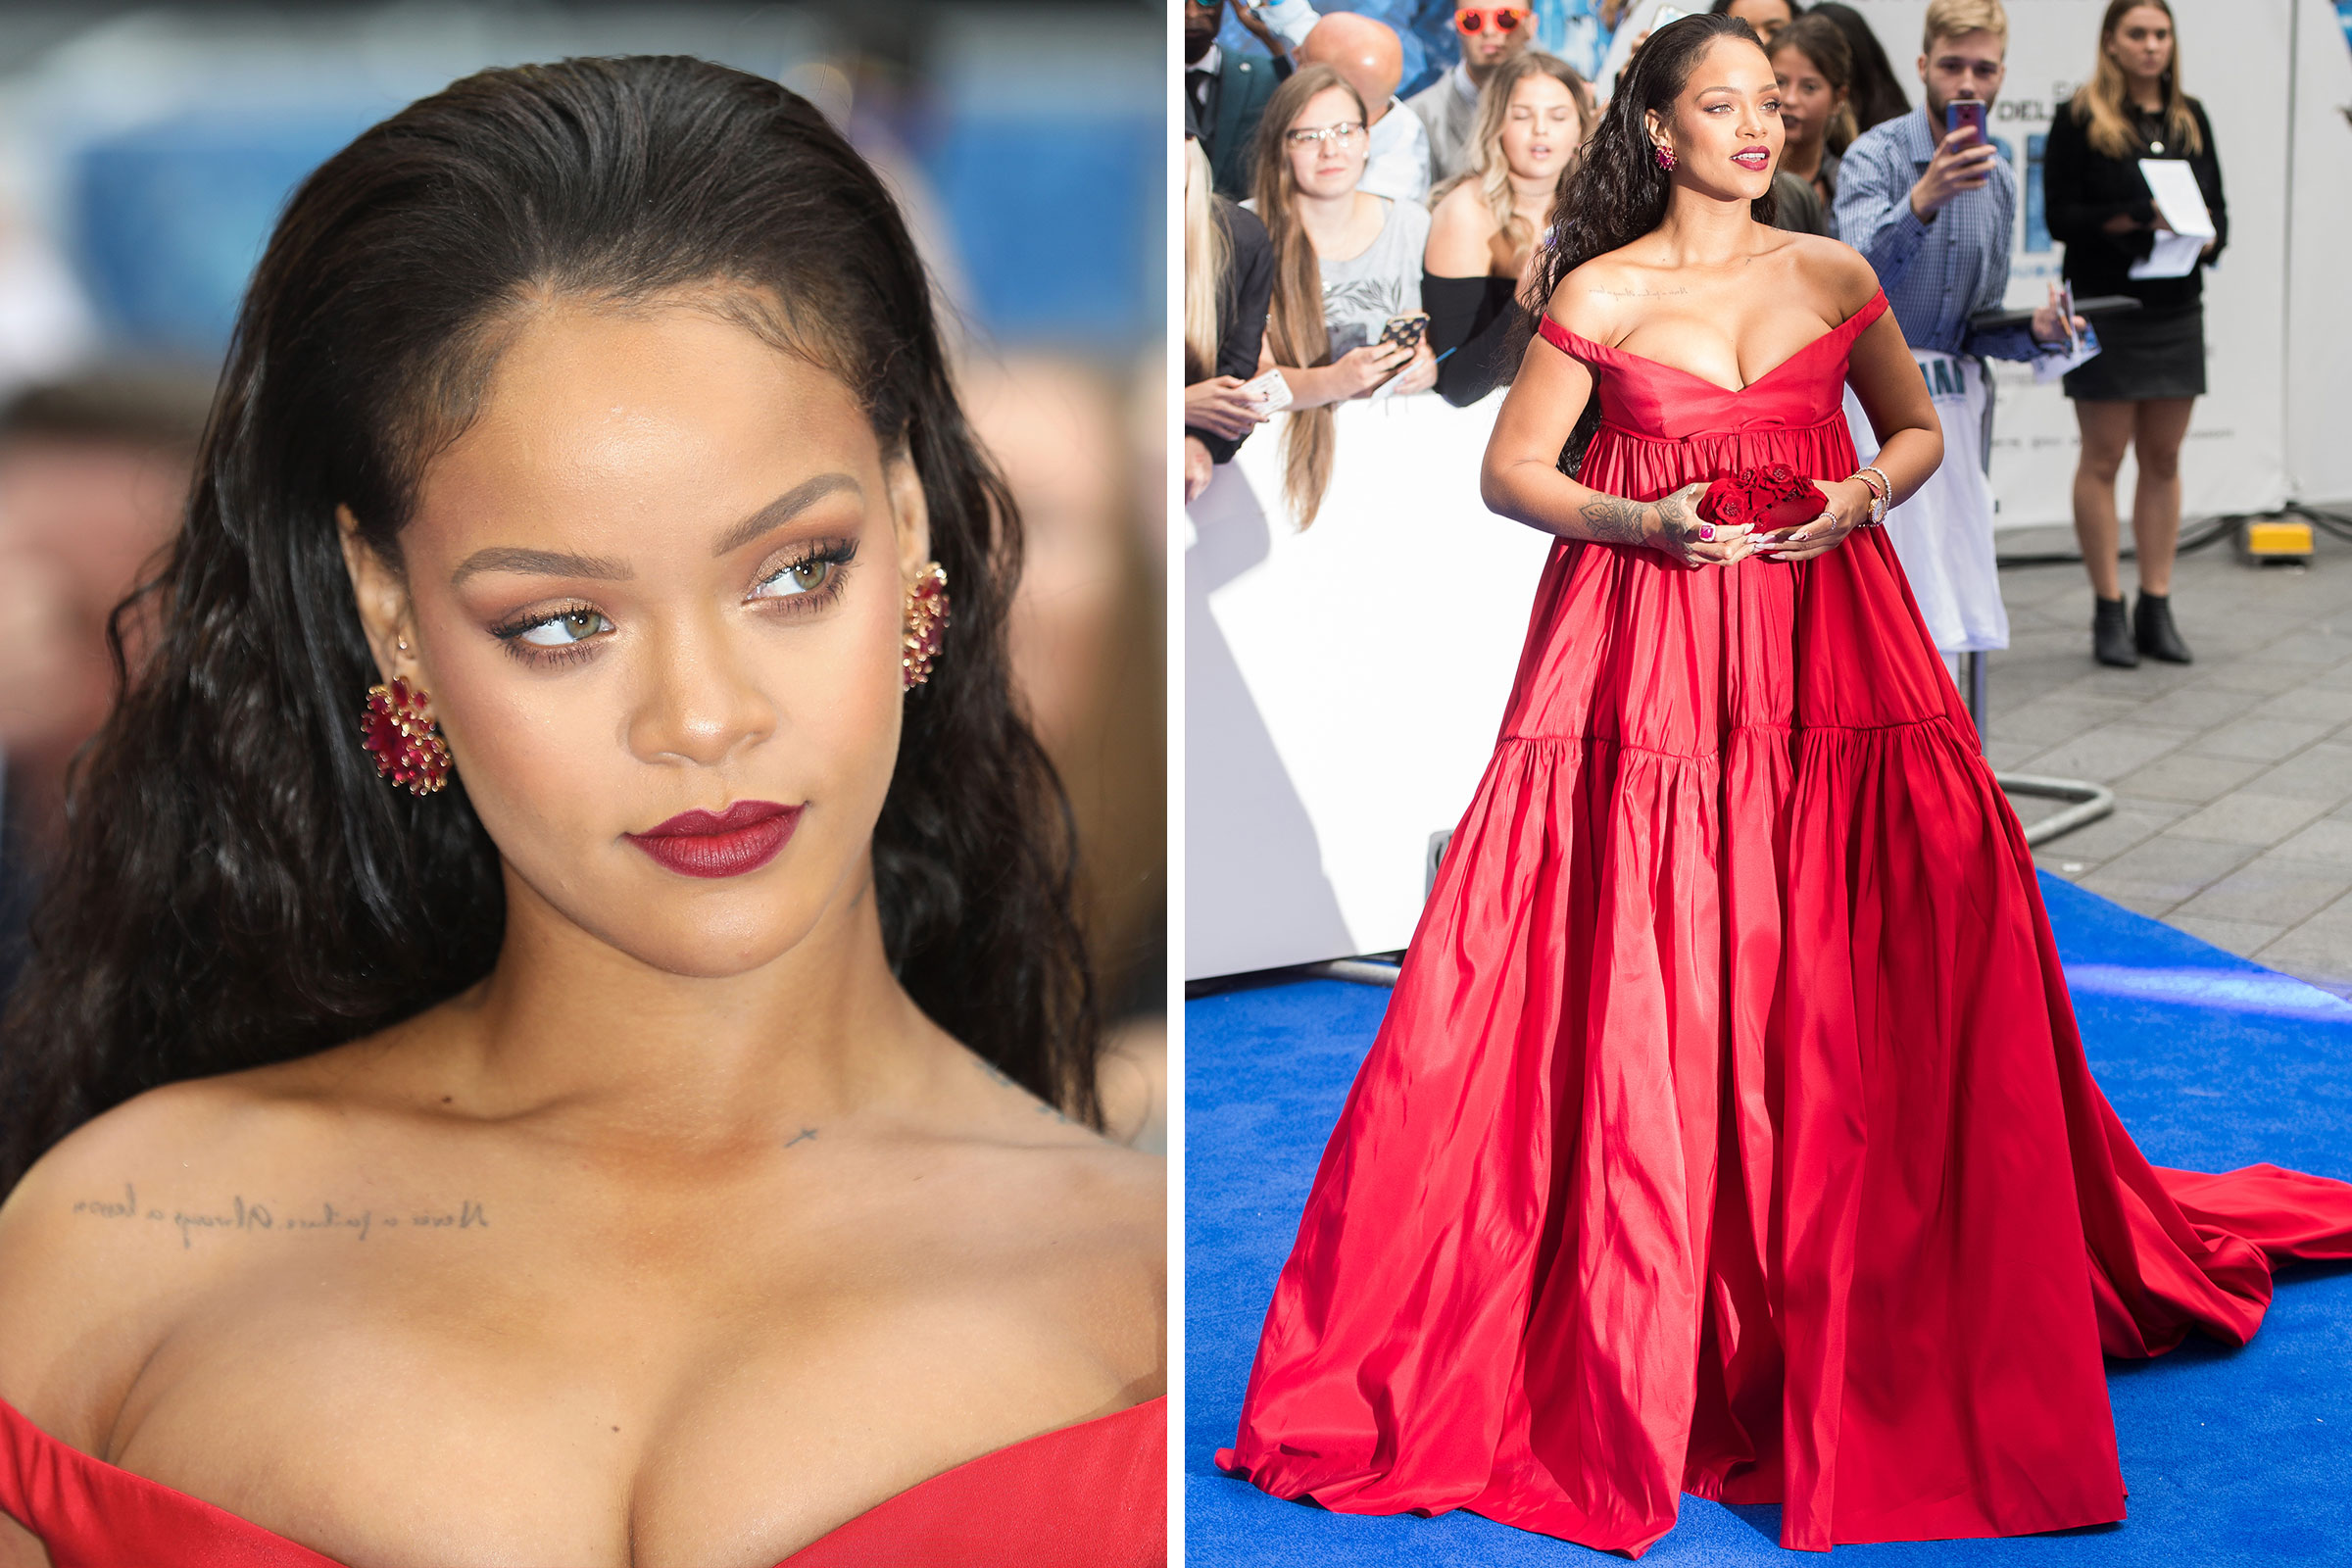 Rihanna attends the "Valerian And The City Of A Thousand Planets" European Premiere at Cineworld Leicester Square in London on July 24, 2017. (Tim P. Whitby—Getty Images; Samir Hussein—WireImage/Getty Images)